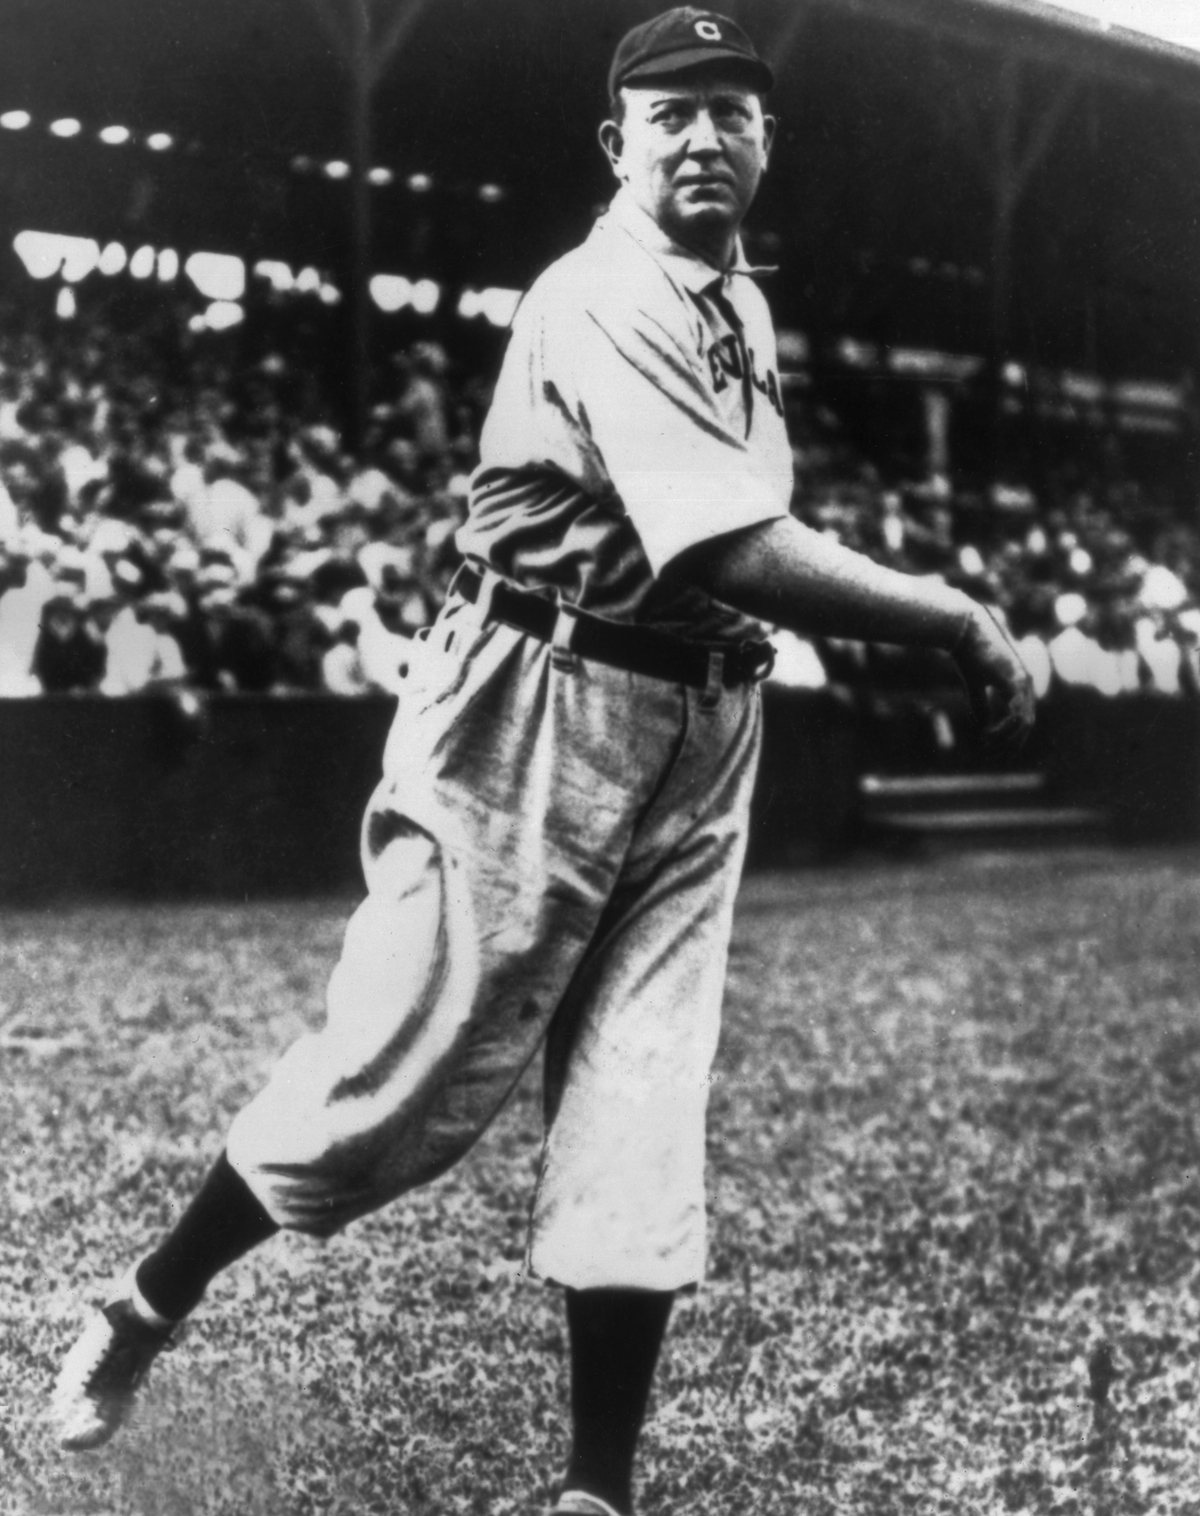 circa 1910:  Full-length portrait of American baseball player Cy Young (1867 - 1955), pitcher for the Cleveland Naps, lightly tossing a ball during warm-ups while wearing his uniform.  (Photo by Photo File/Getty Images)